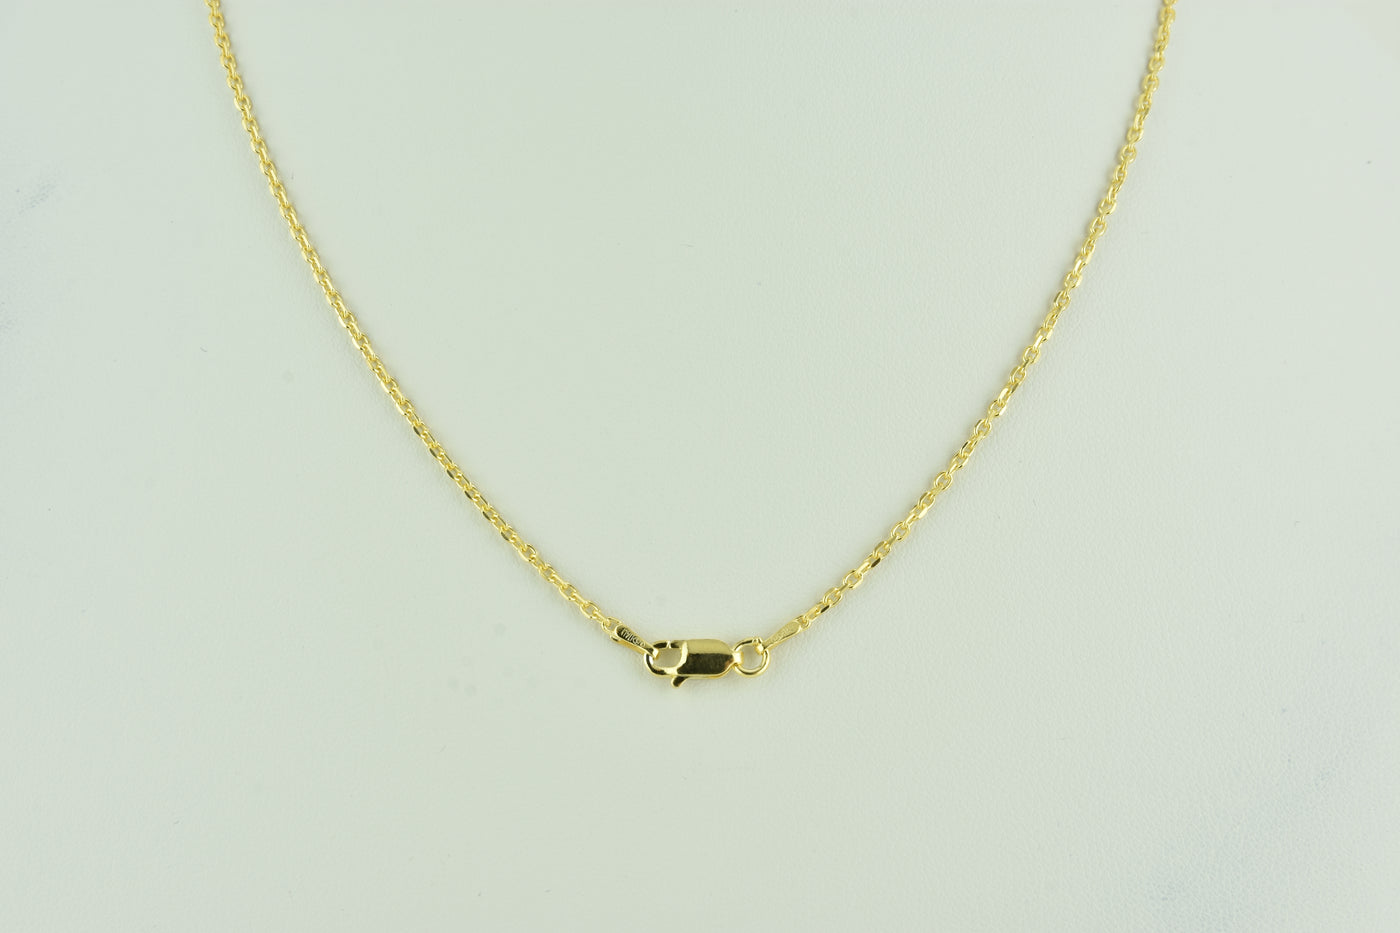 Delicate Link Italian Sterling Silver Chain in Yellow Gold plate